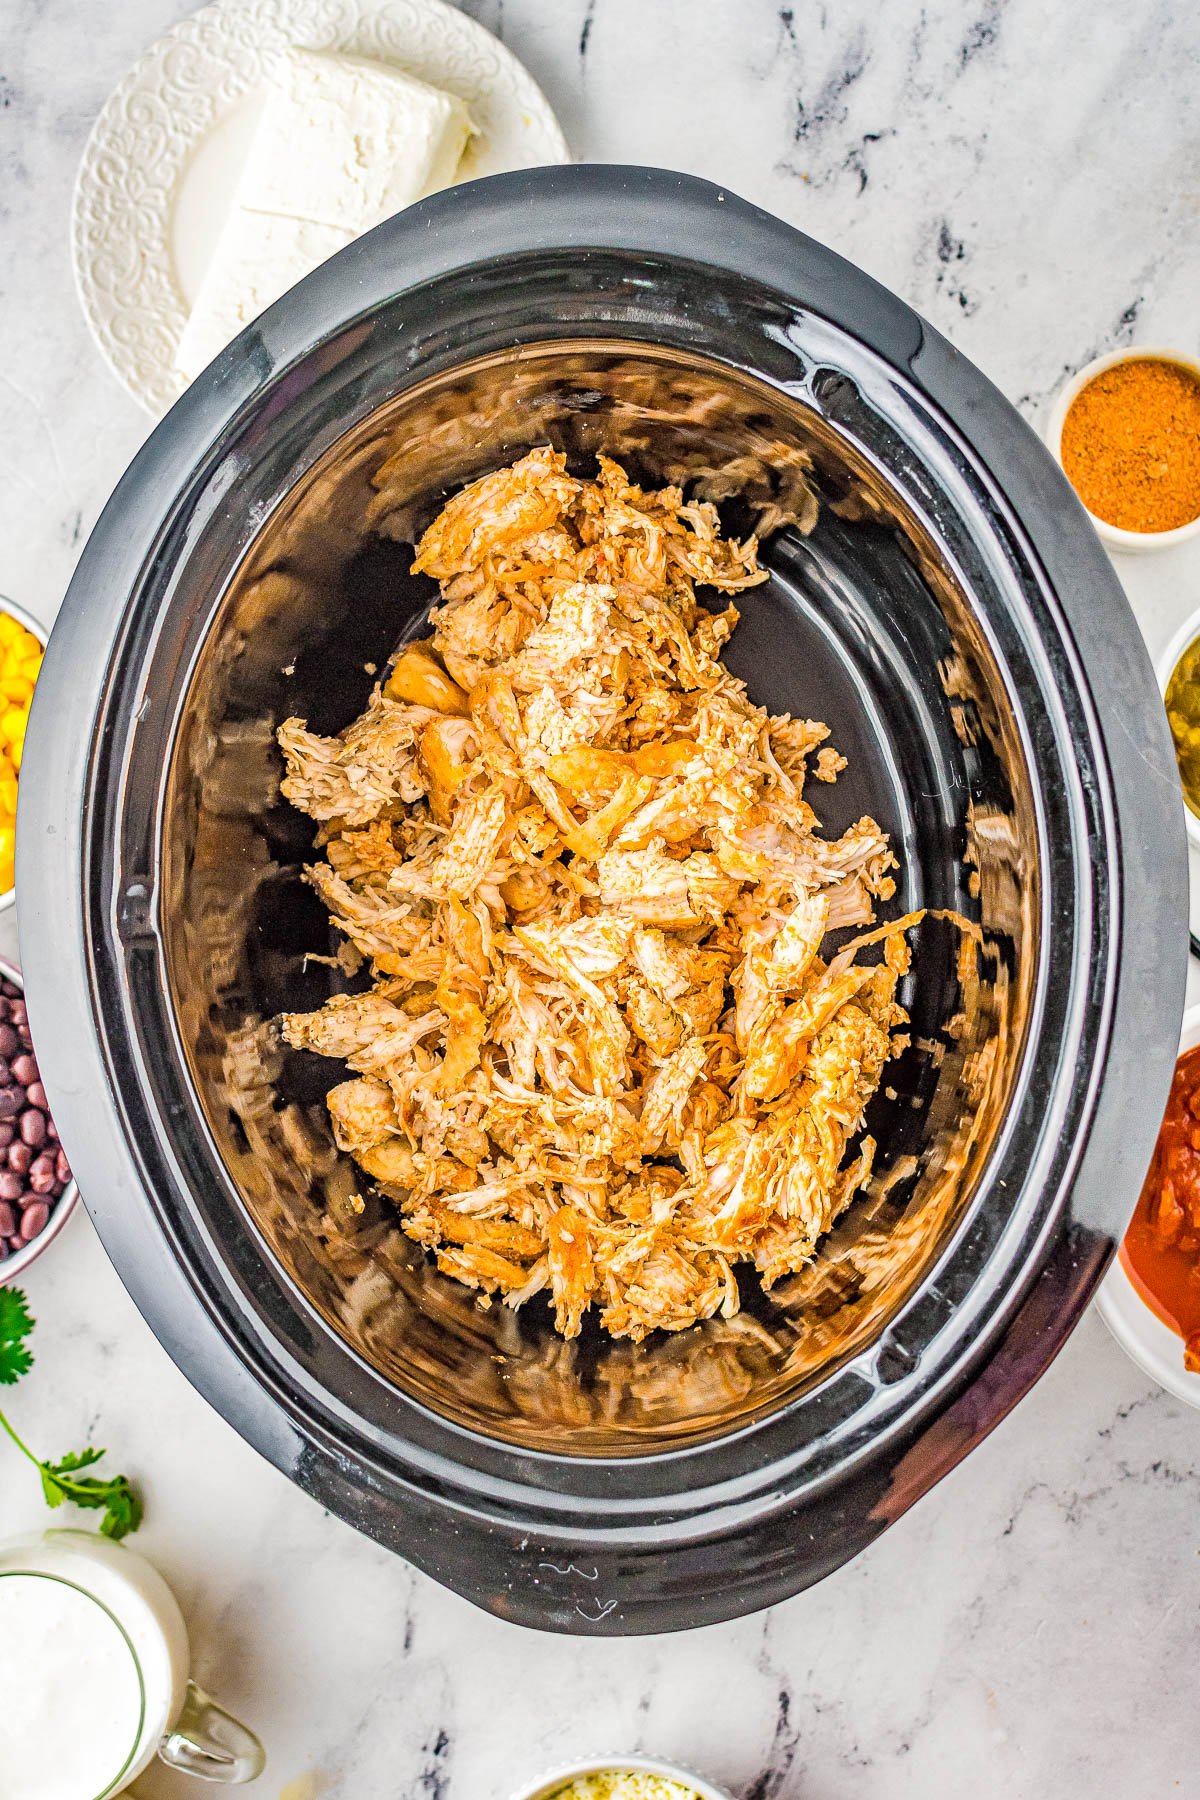 Slow Cooker Fiesta Chicken - An EASY Crock-Pot recipe for fiesta ranch chicken that the whole family LOVES! There's tender chicken, cream cheese, salsa, black beans, green chiles, and more which creates a little fiesta in your mouth! Serve it as-is, over rice, or in tacos. Perfect for busy weeknight dinners or make it for your next game day party! 